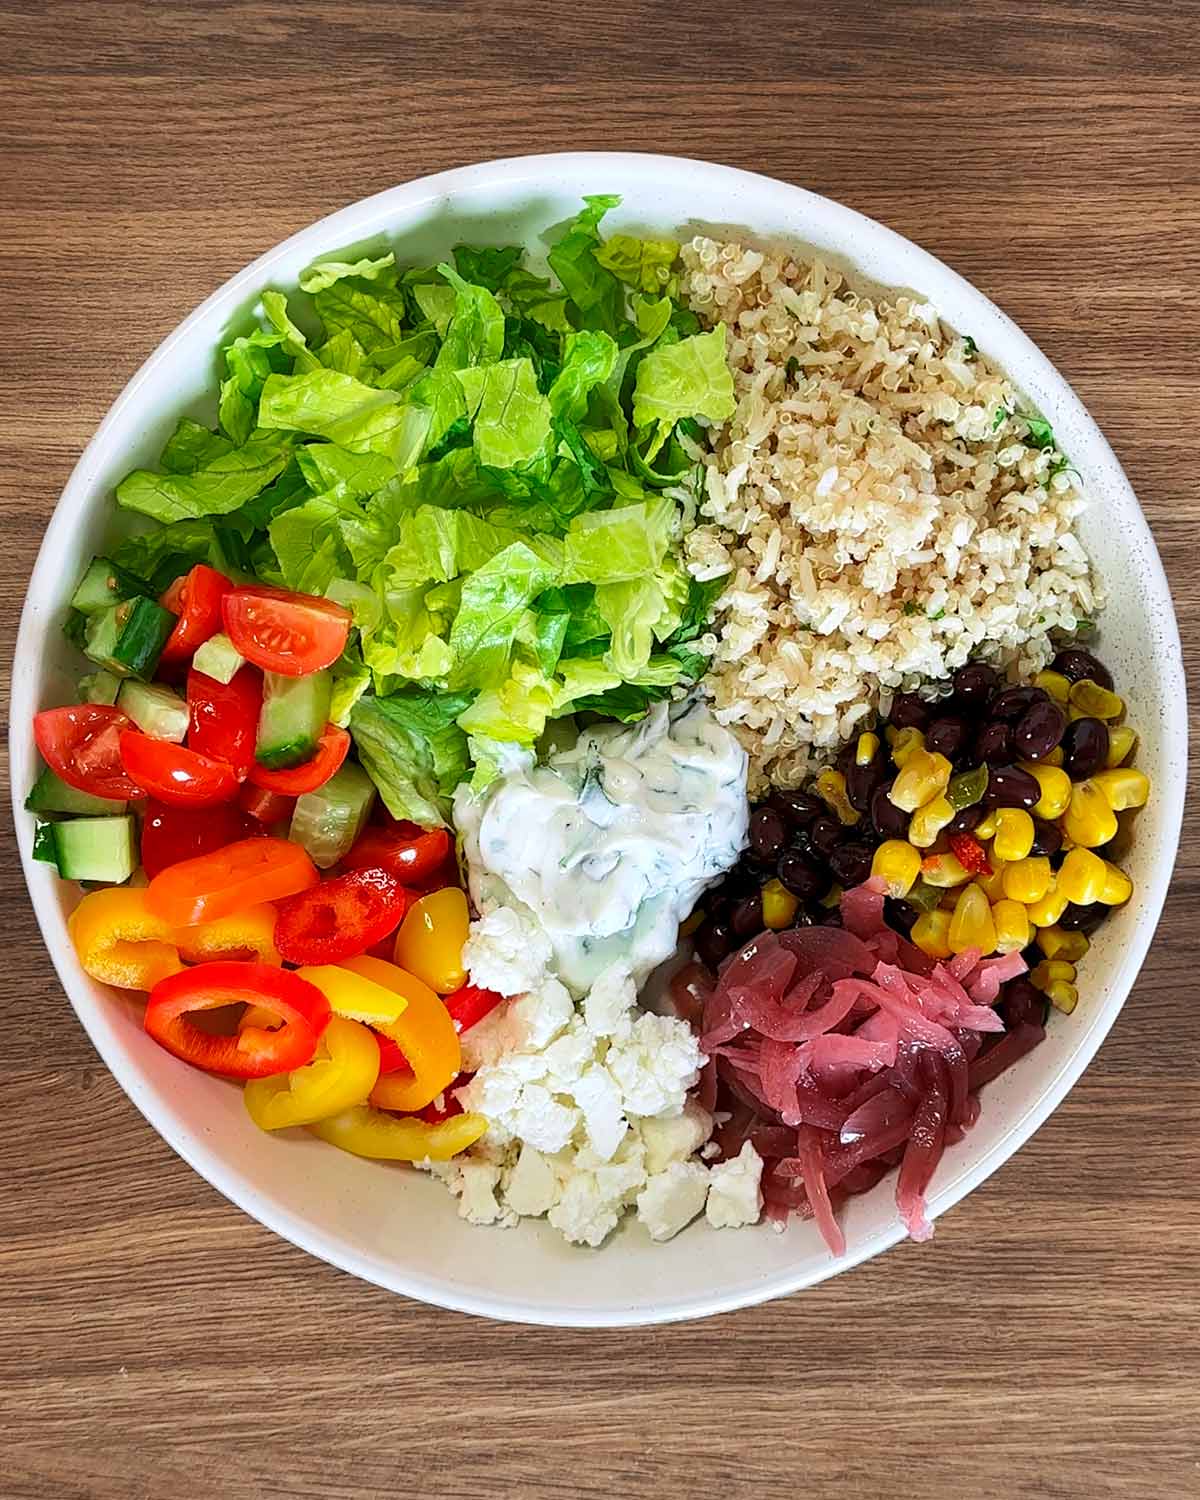 A bowl containing lettuce, rice, corn, beans, peppers and cheese.